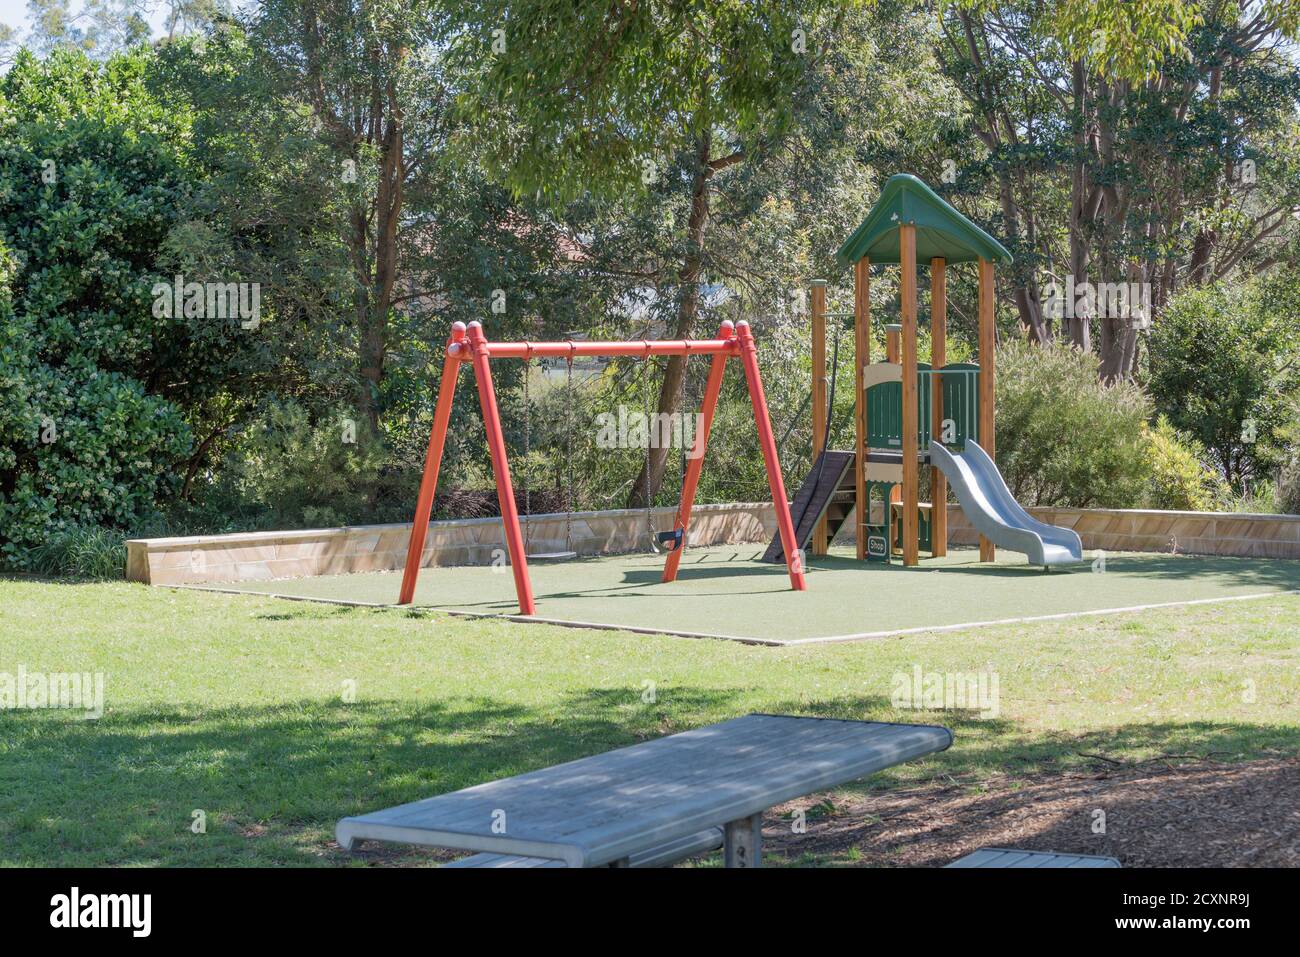 A small park complete with children's swings and play area in the Sydney suburb of Annandale, New South Wales, Australia Stock Photo